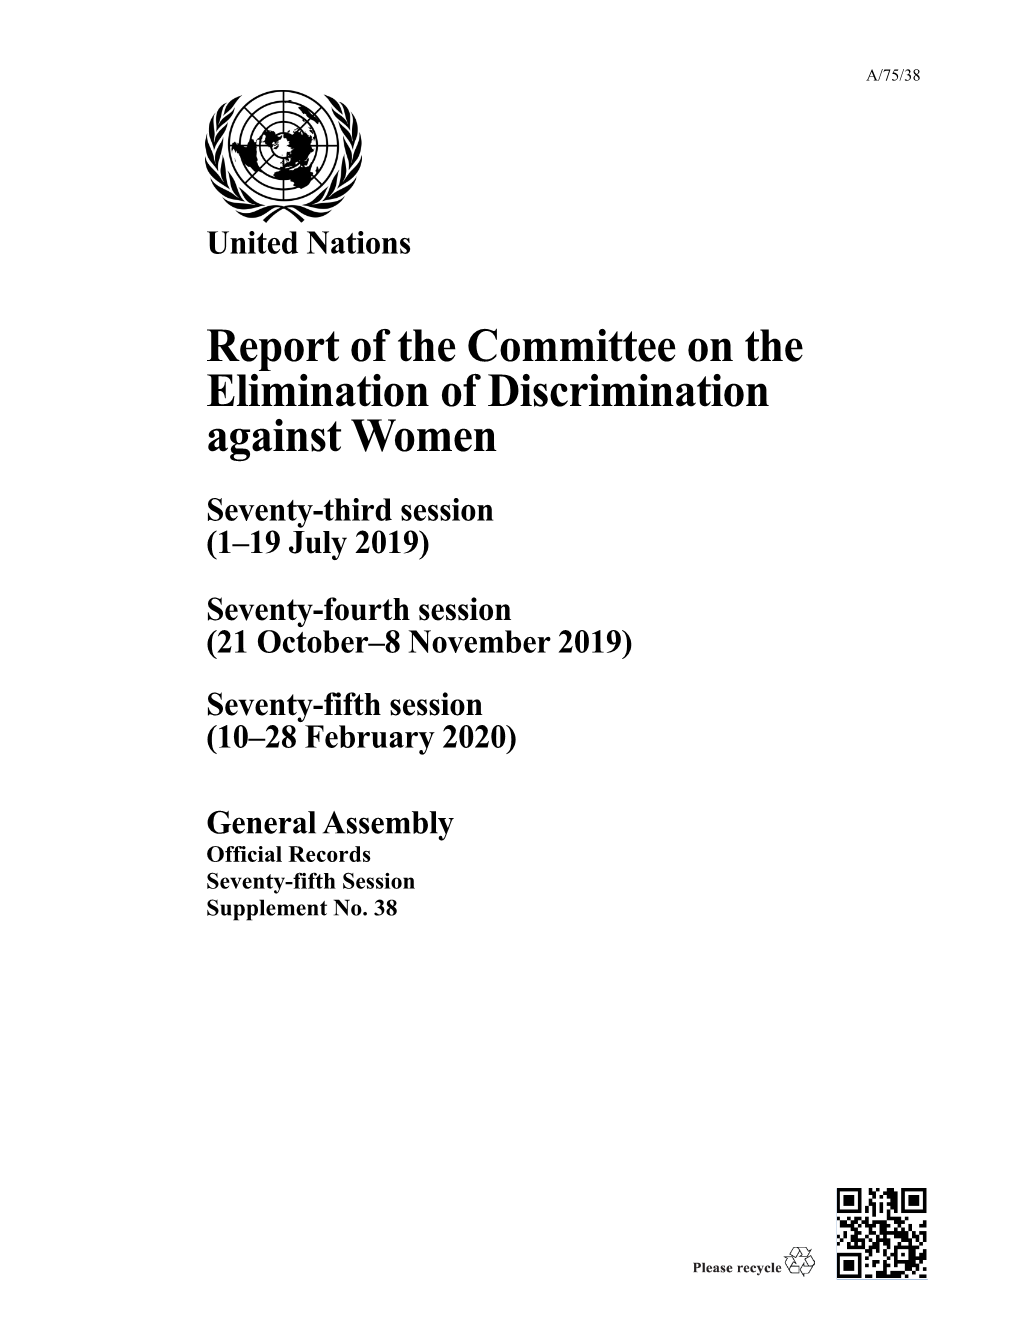 Report of the Committee on the Elimination of Discrimination Against Women